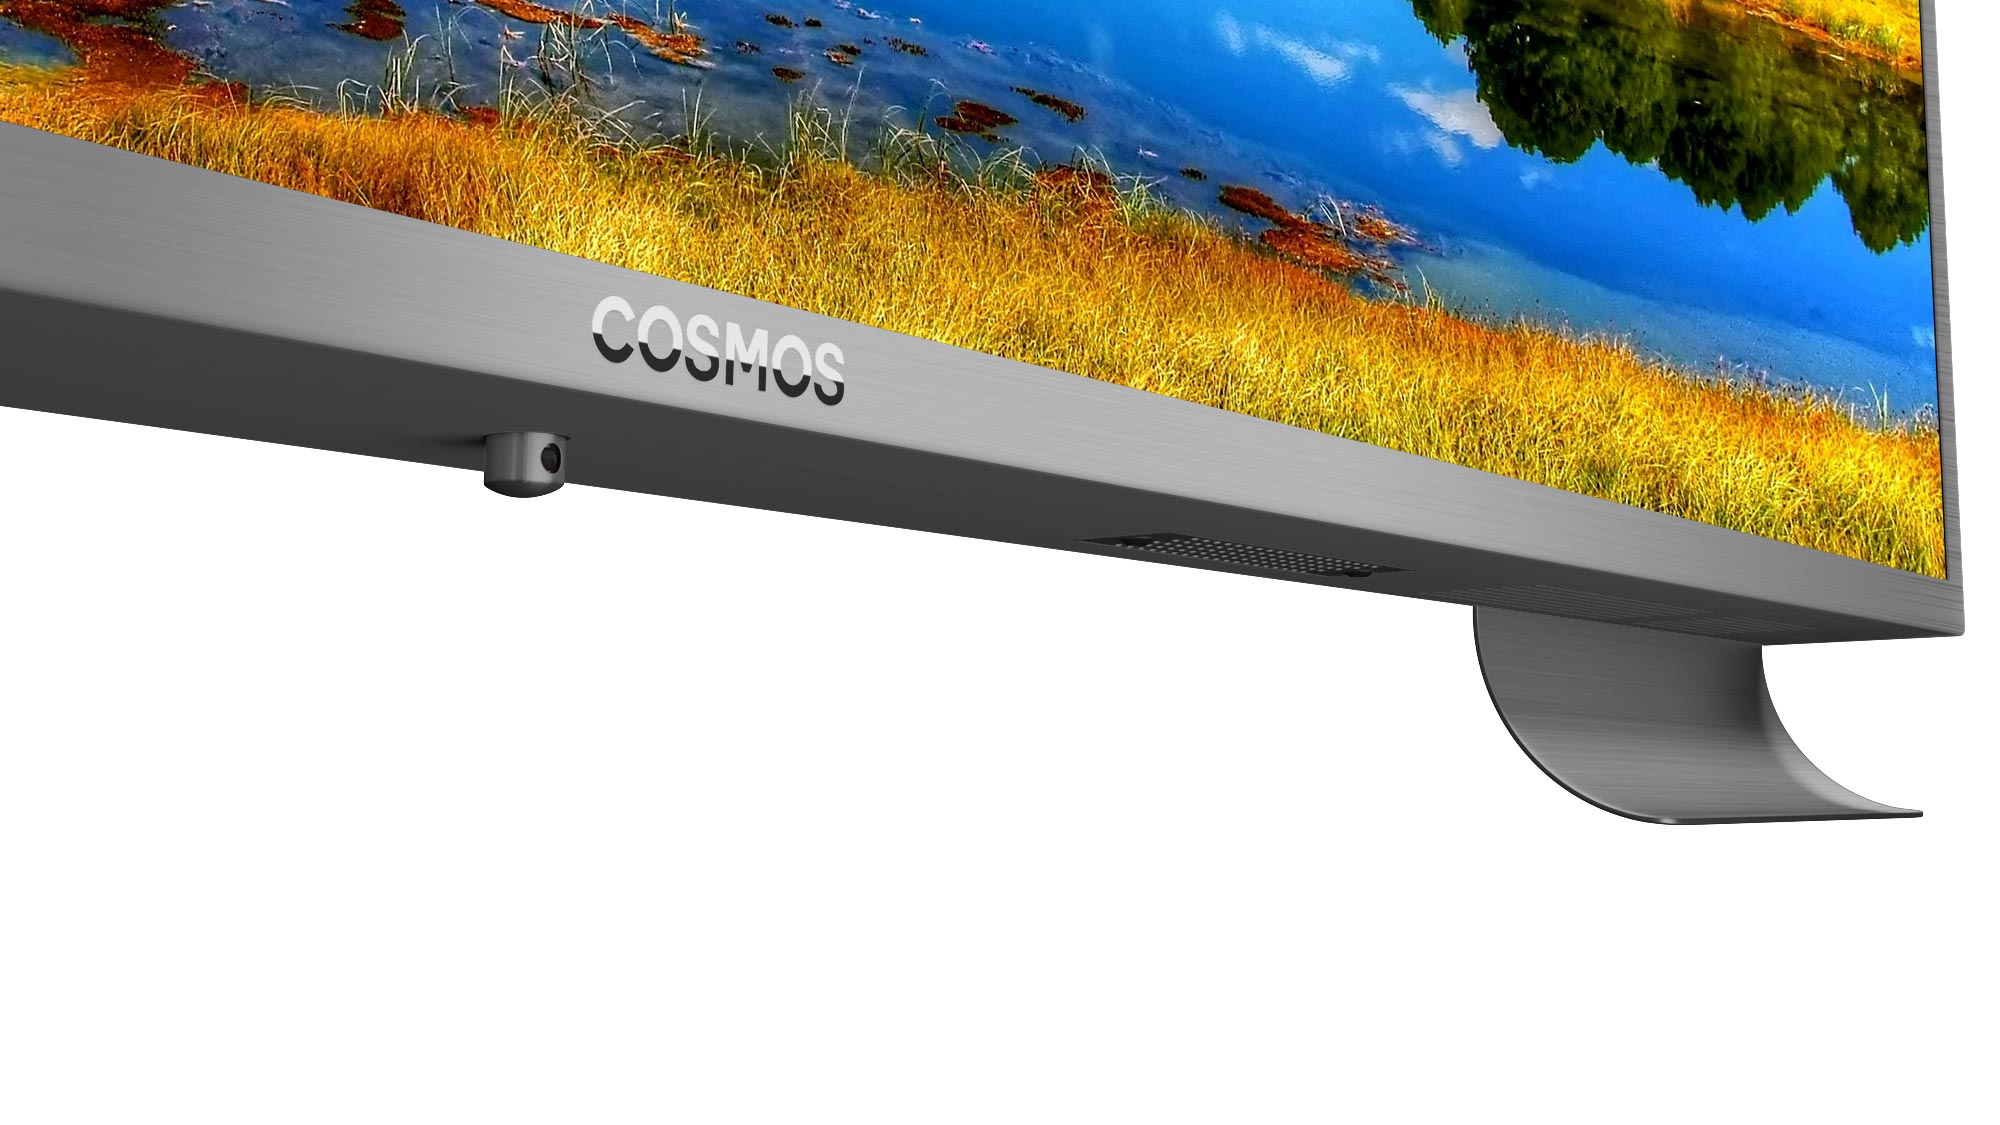 Cosmos TV in a polished stainless finish, reflecting durability, sleek aesthetics, and cutting-edge technology.